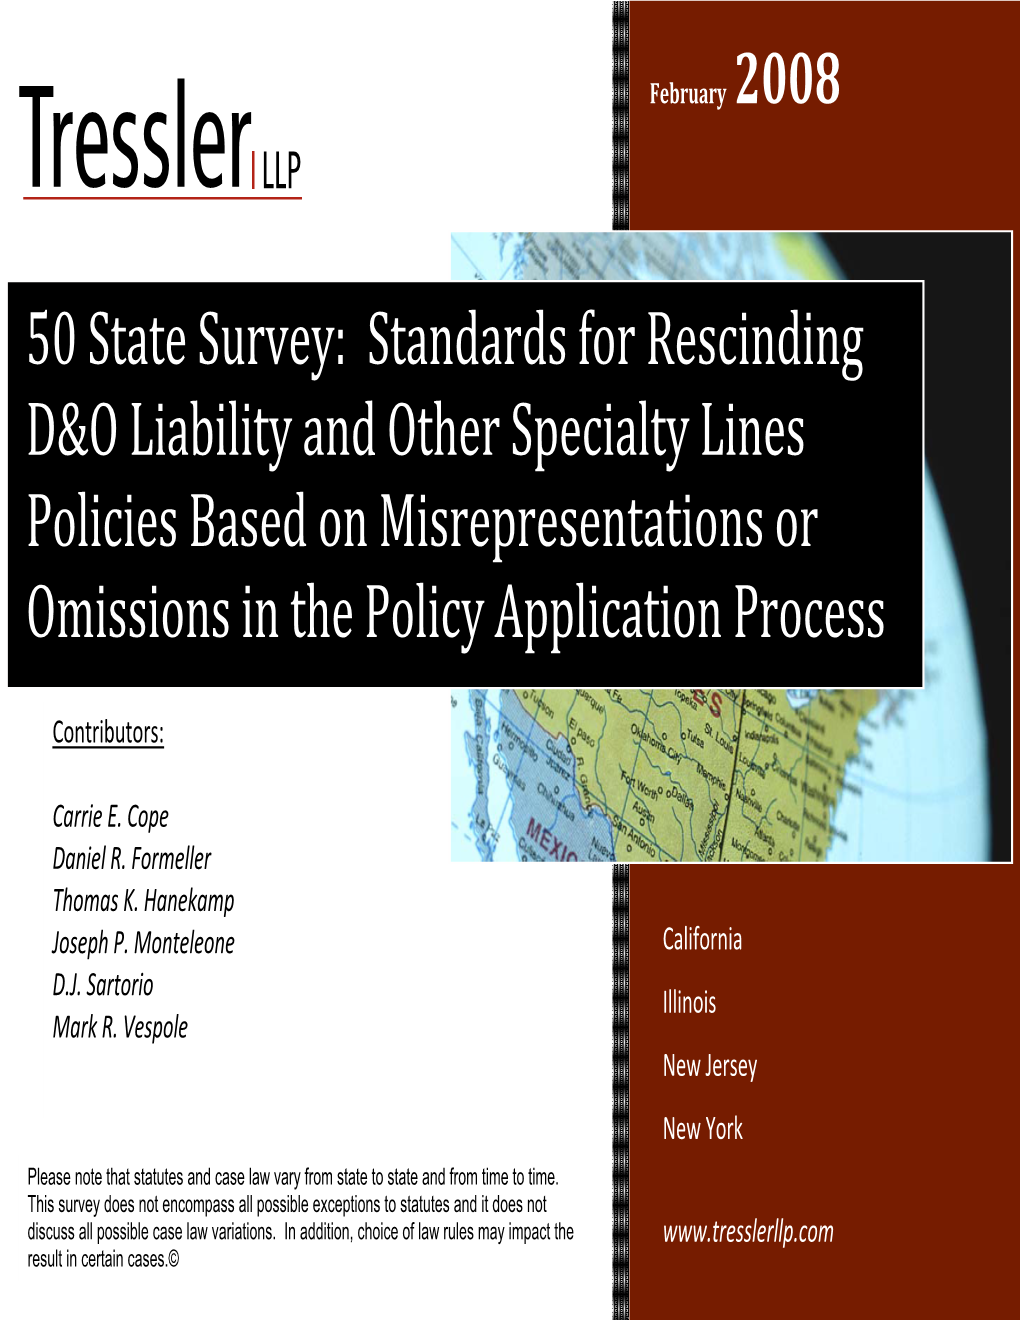 50 State Survey: Standards for Rescinding D&O Liability and Other